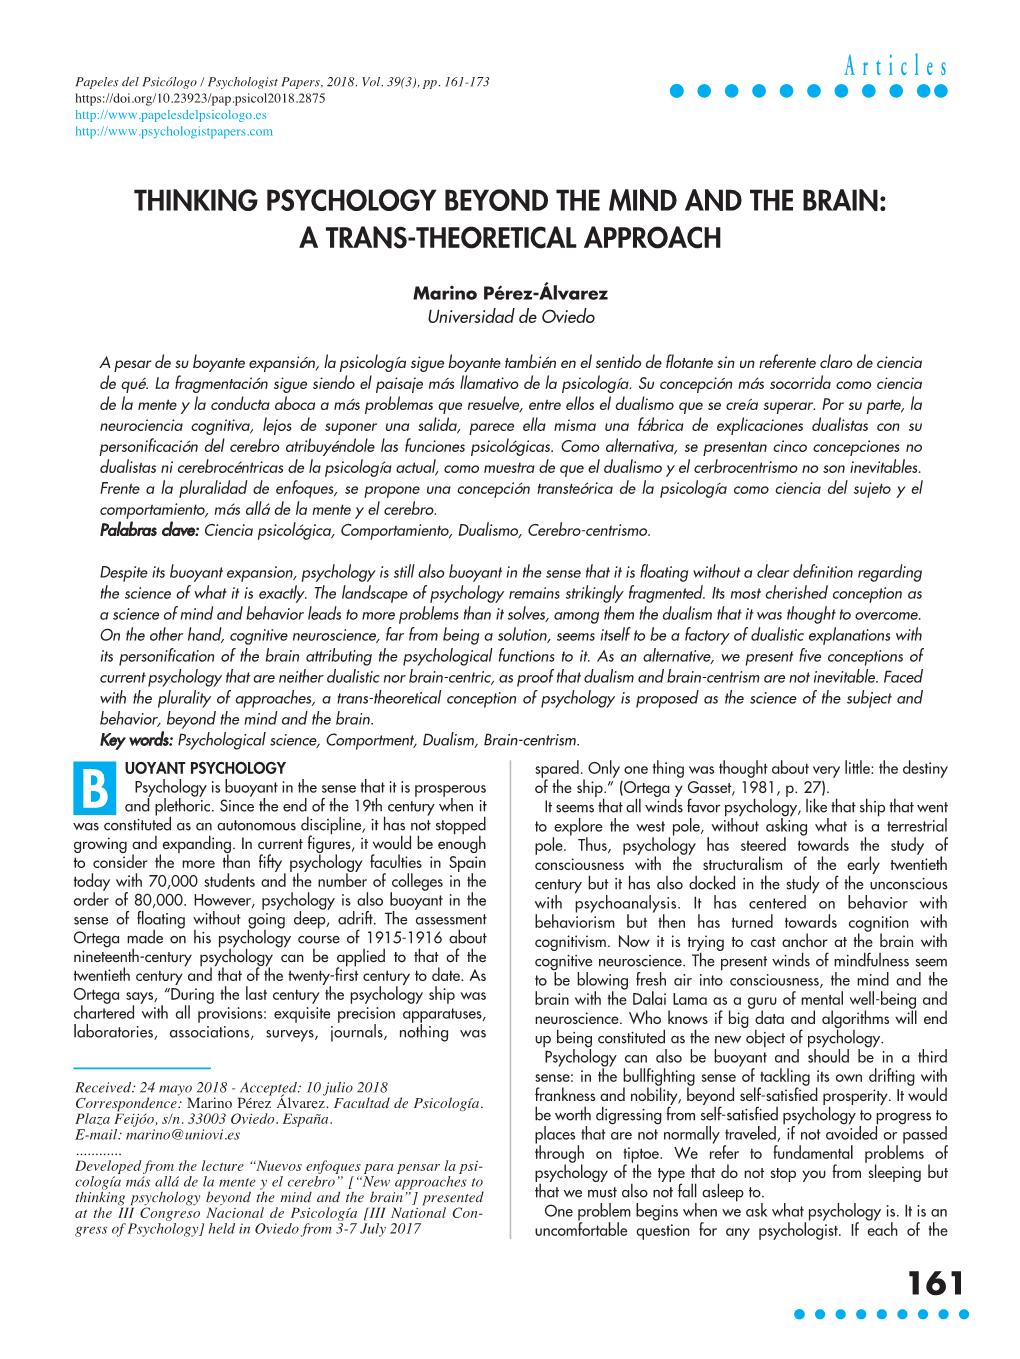 Thinking Psychology Beyond the Mind and the Brain: a Trans-Theoretical Approach